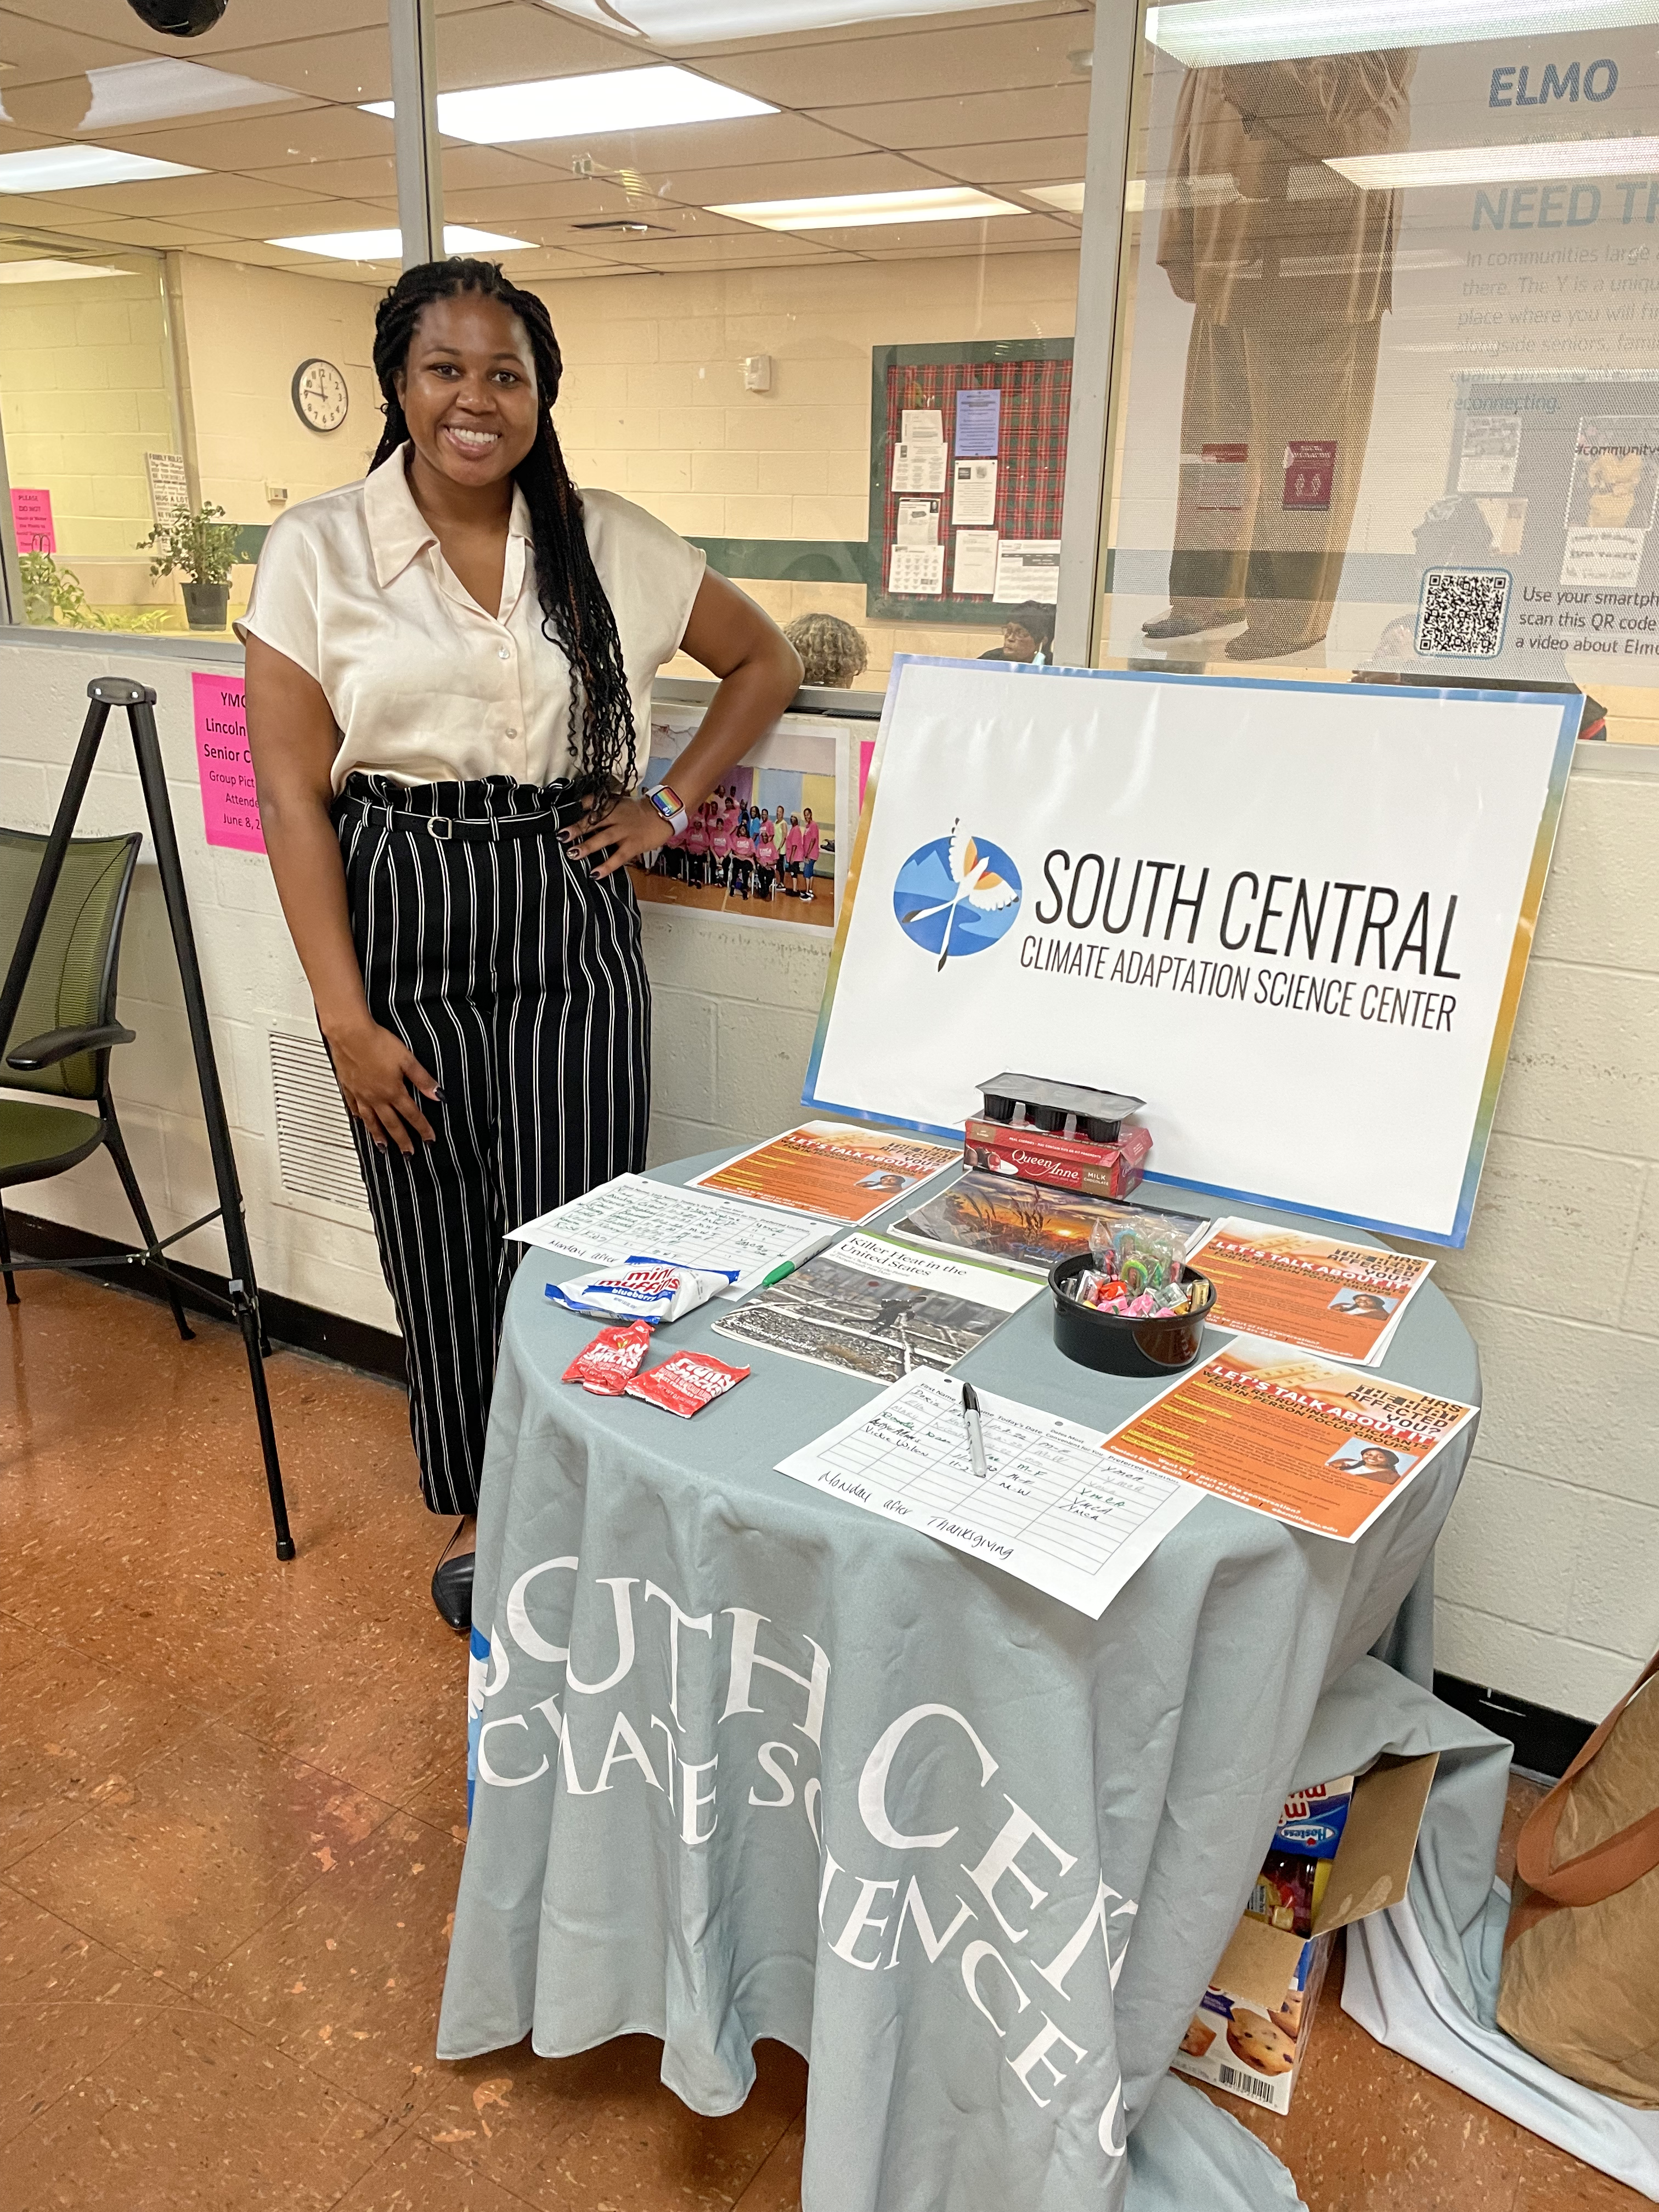 Ebone Smith works at the South Central Climate Adaptation Science Center recruitment table at the Senior Center in Oklahoma City.